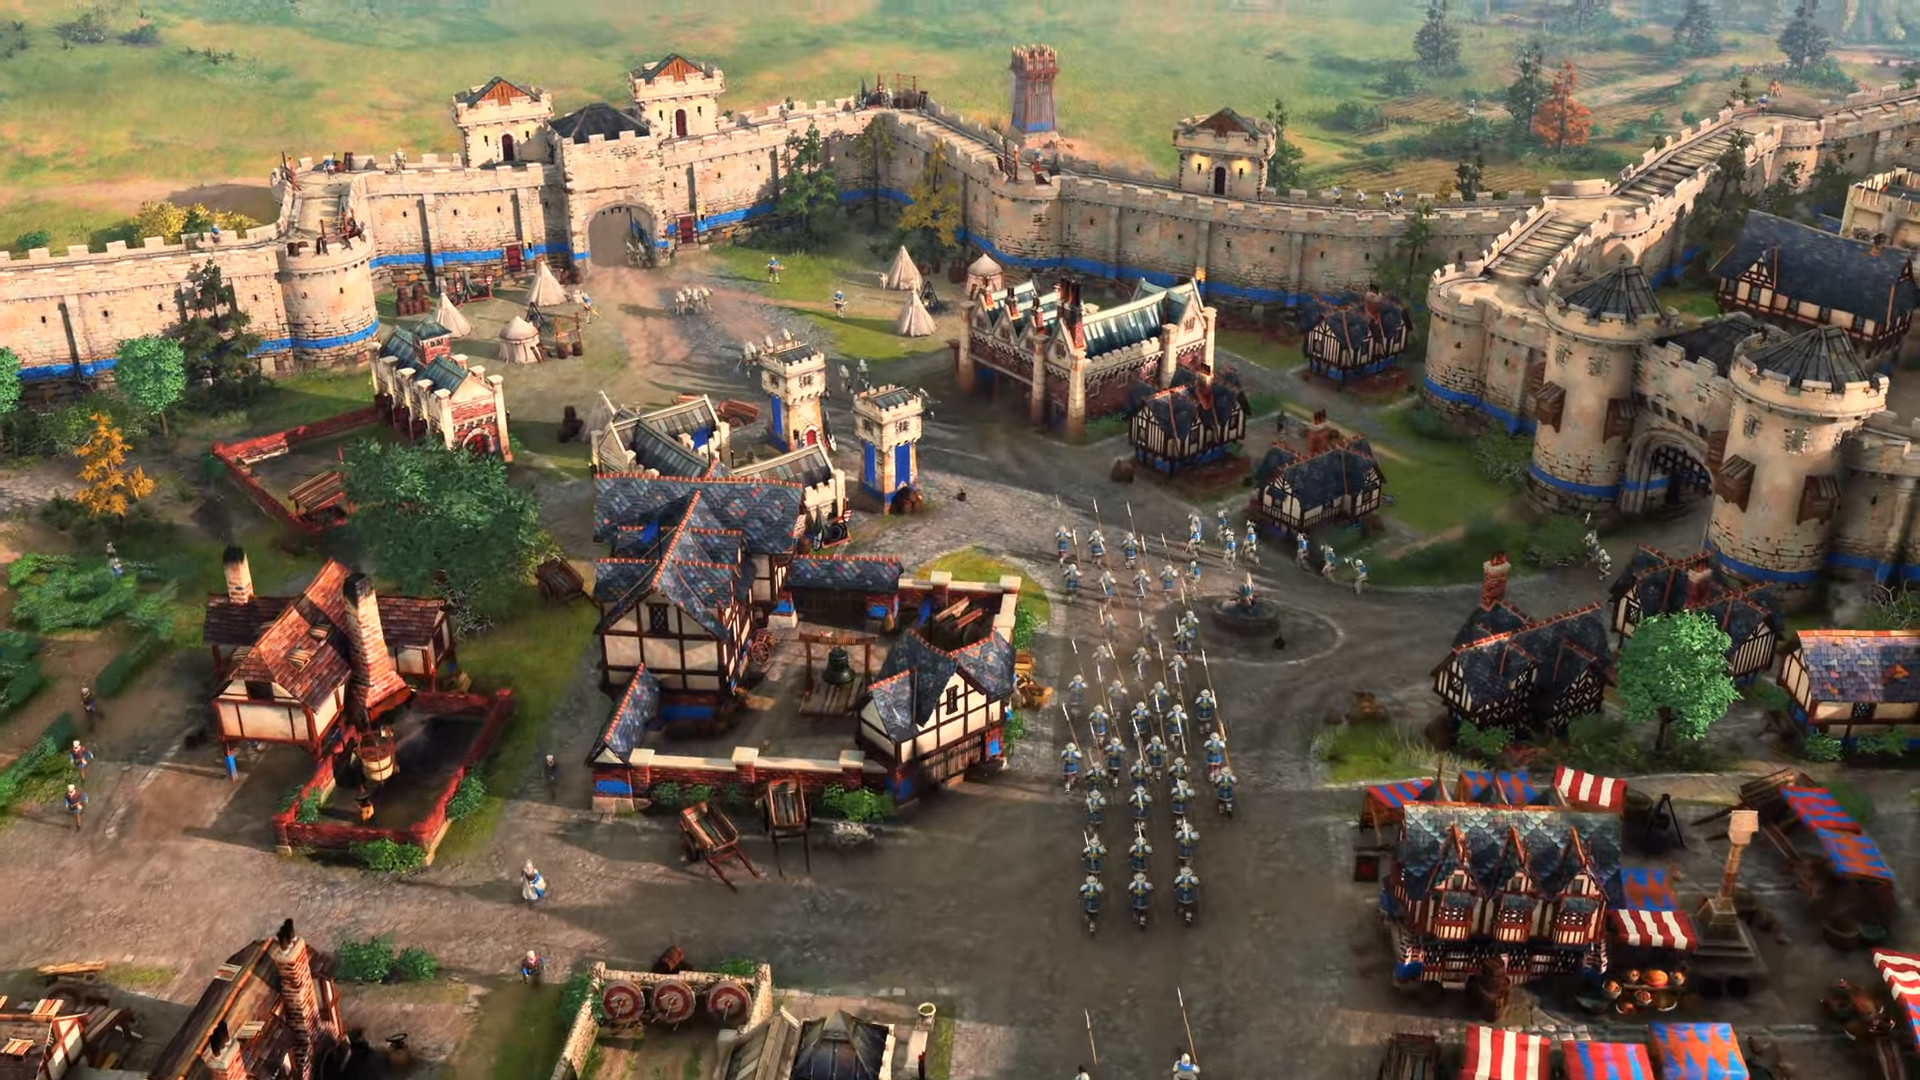 Age of Empires IV civilizations will play very differently from each other